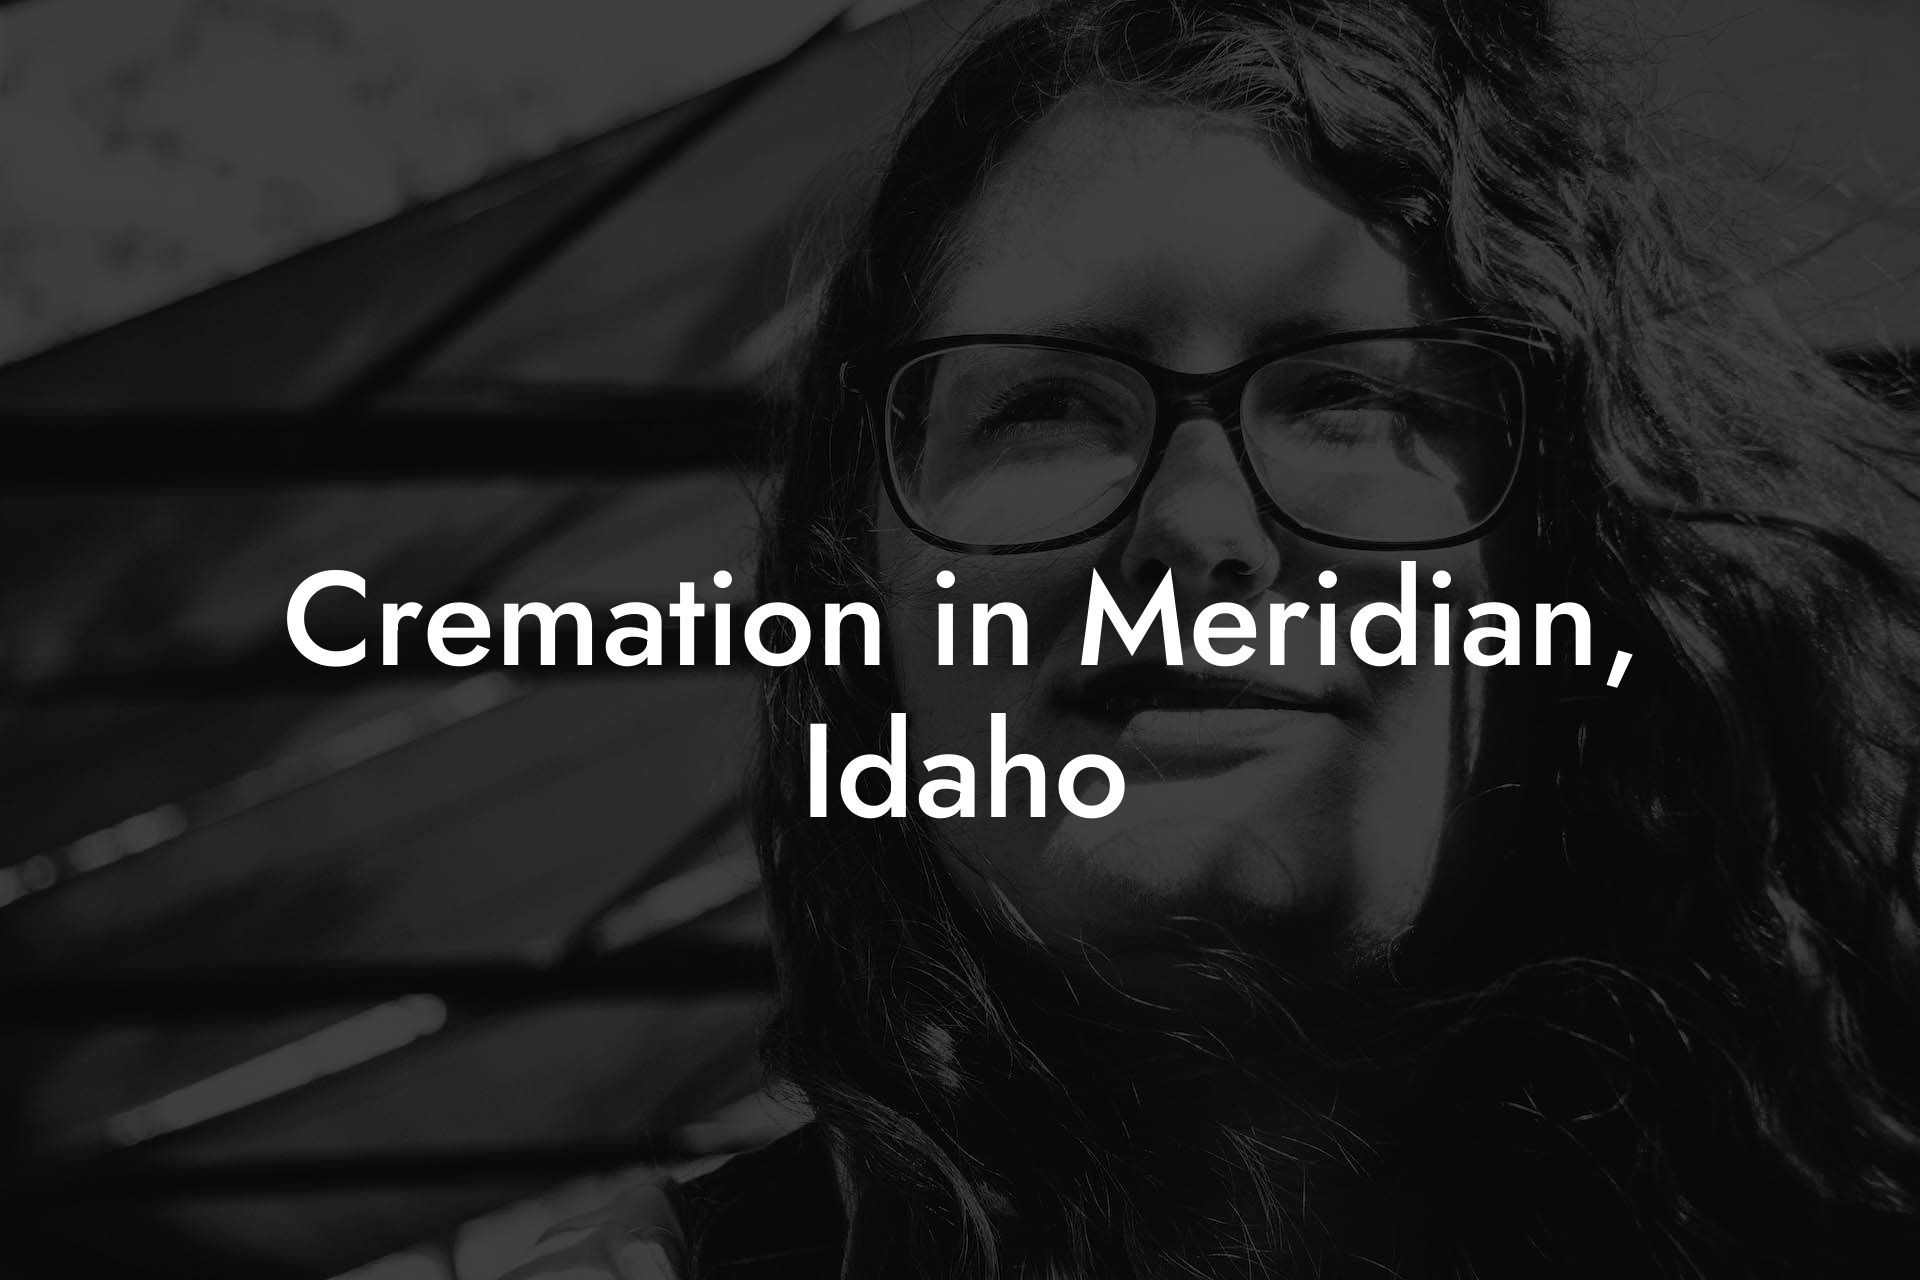 Cremation in Meridian, Idaho